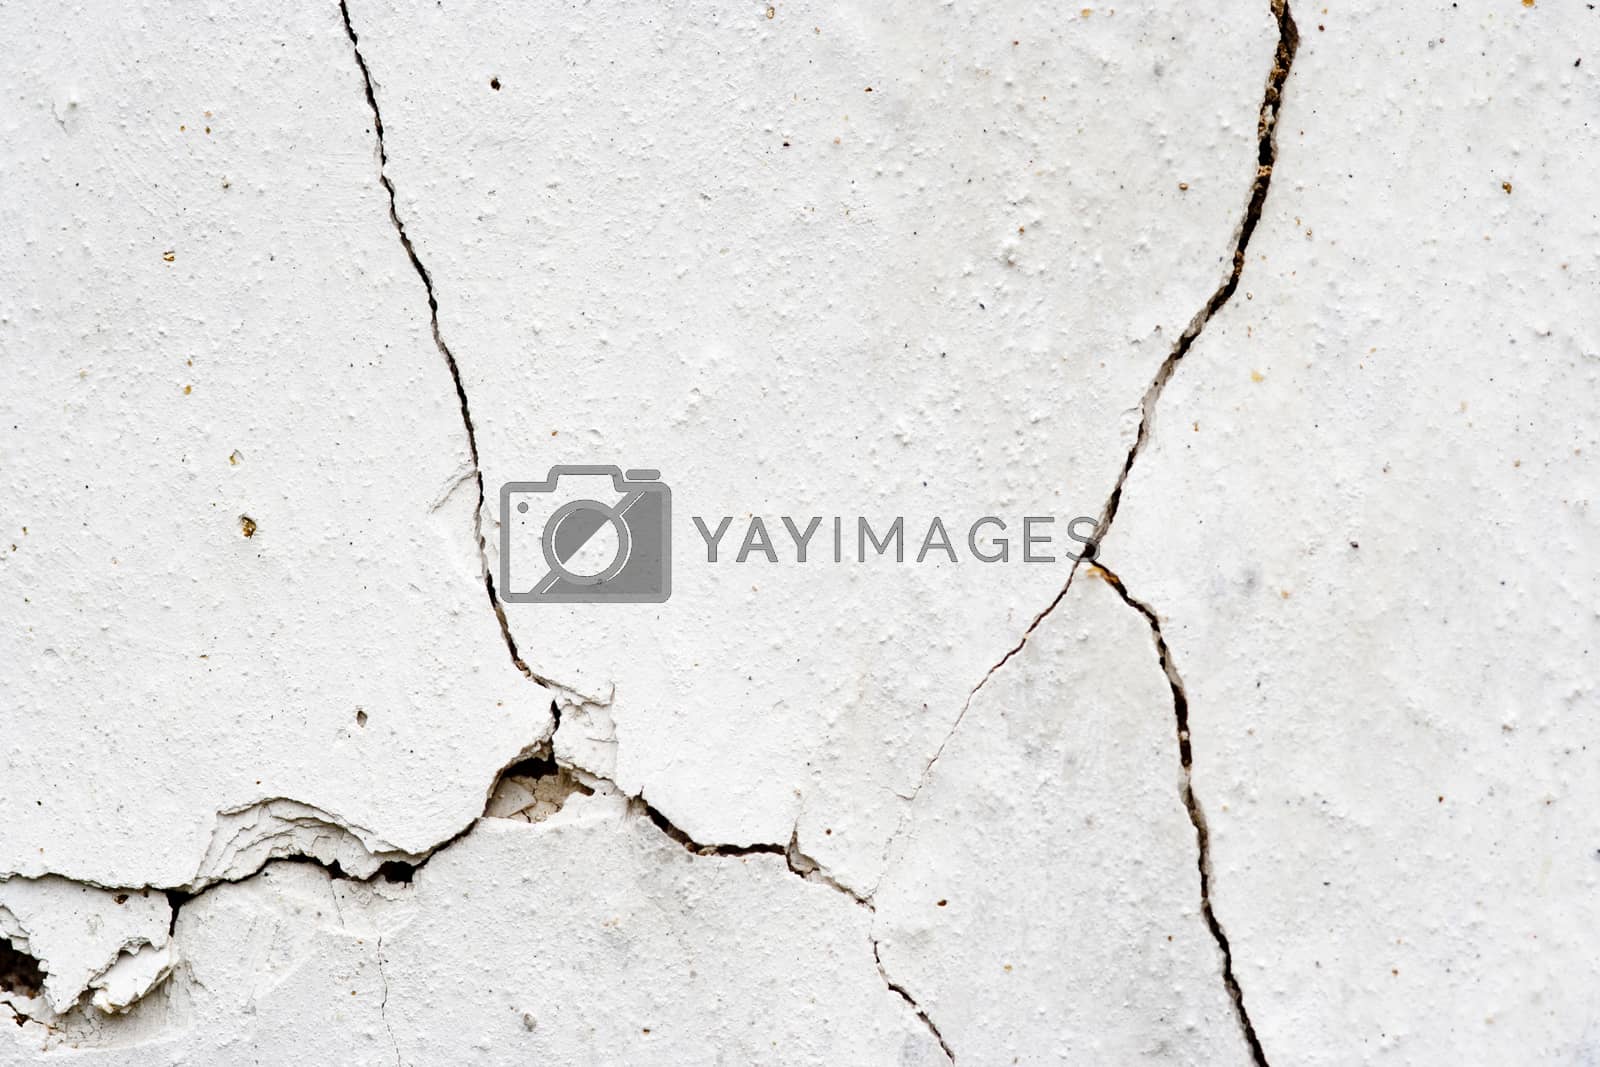 Royalty free image of Cracked Plaster by Mibuch